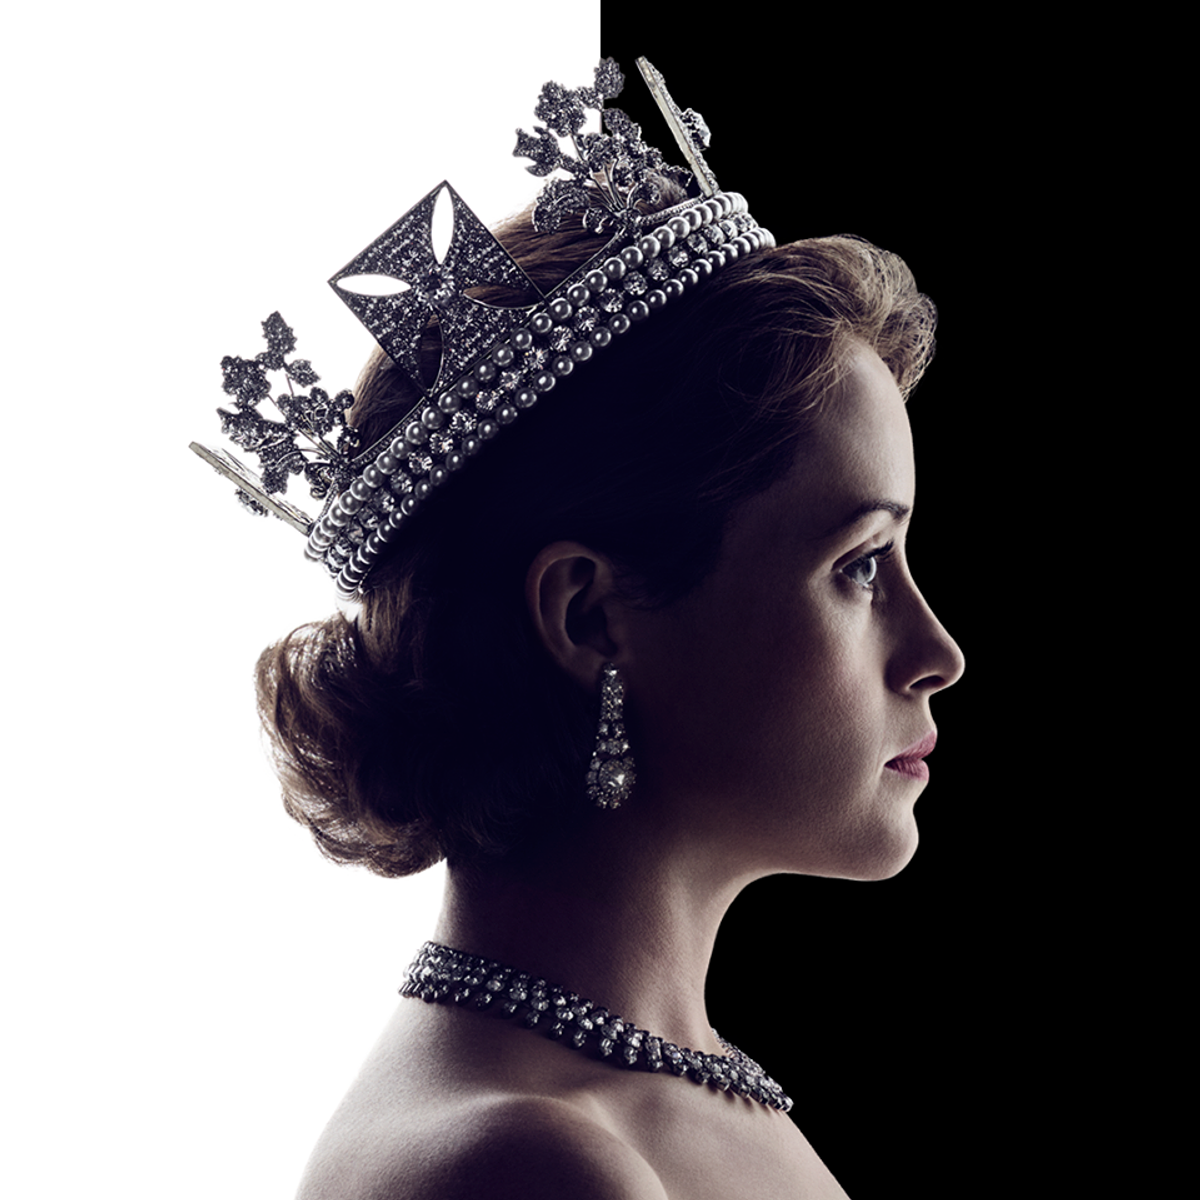 A Review of Netflix's "The Crown"